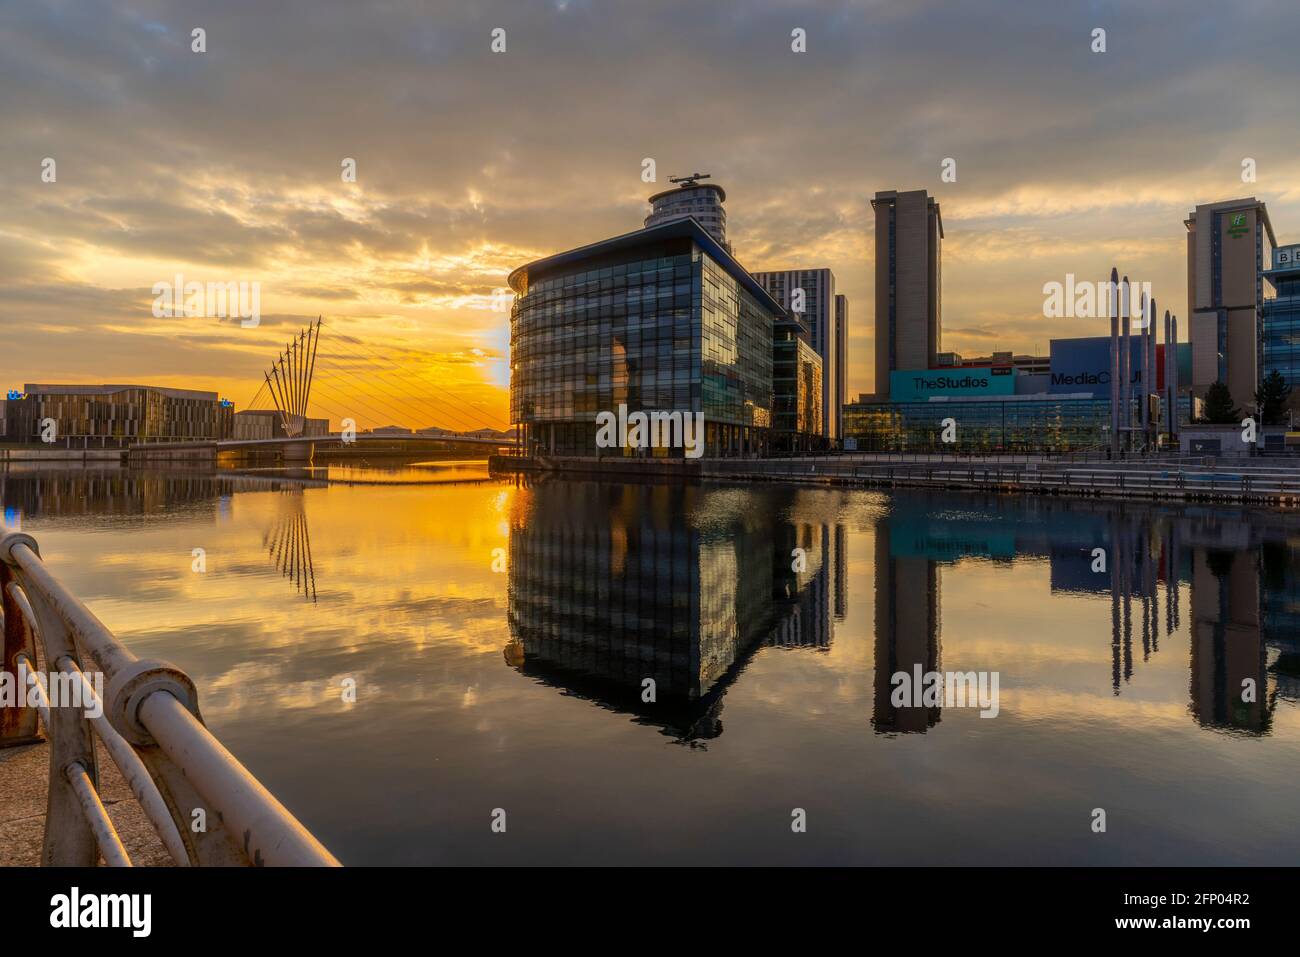 View of MediaCity UK at sunset, Salford Quays, Manchester, England, United Kingdom, Europe Stock Photo